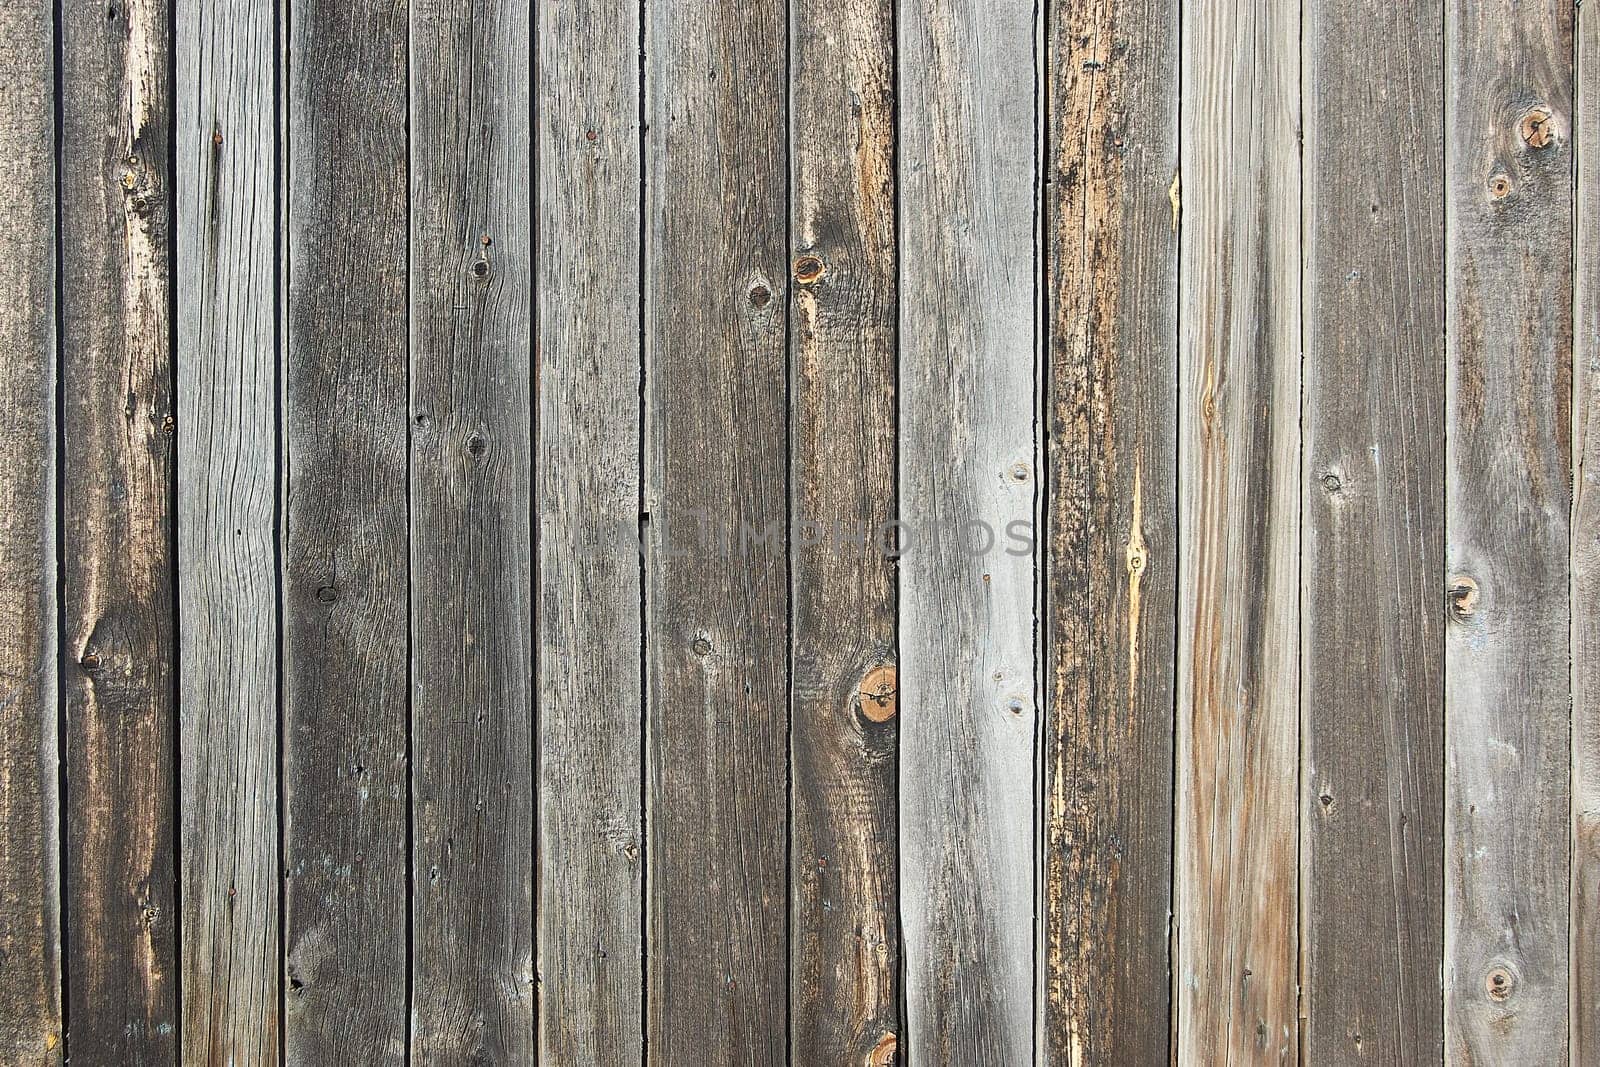 Gray wood paneling of the barn walls with a wide texture. Old solid wood sluts on a rustic shabby gray background.Old vintage background with wood texture